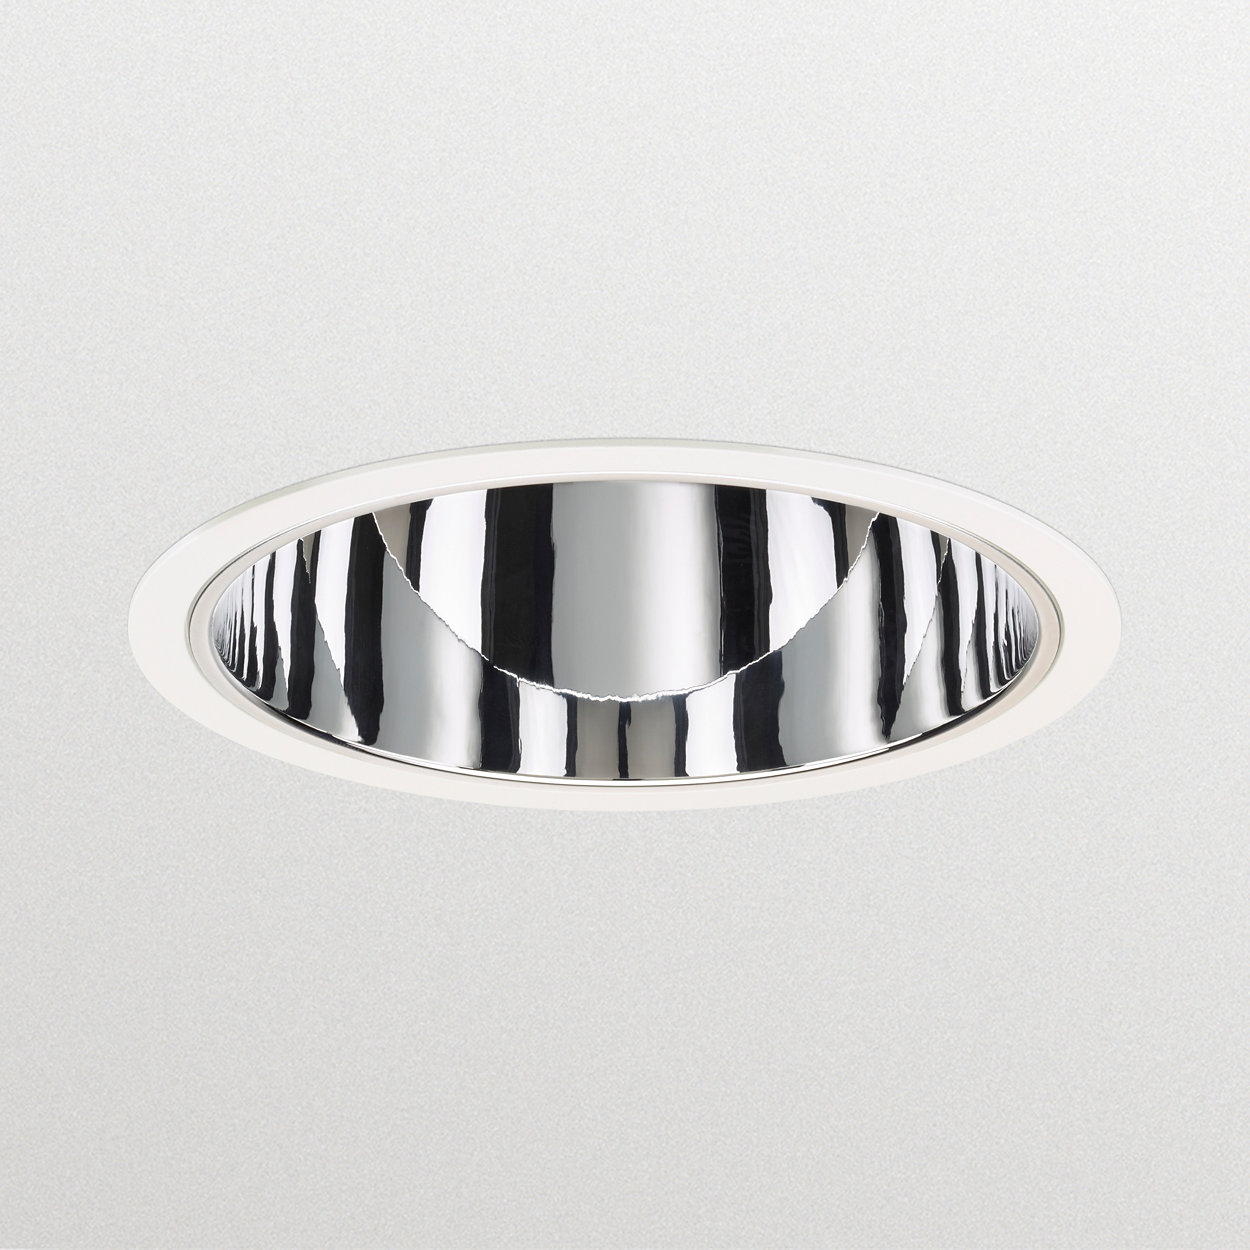 LuxSpace recessed – high efficiency, visual comfort and a stylish design